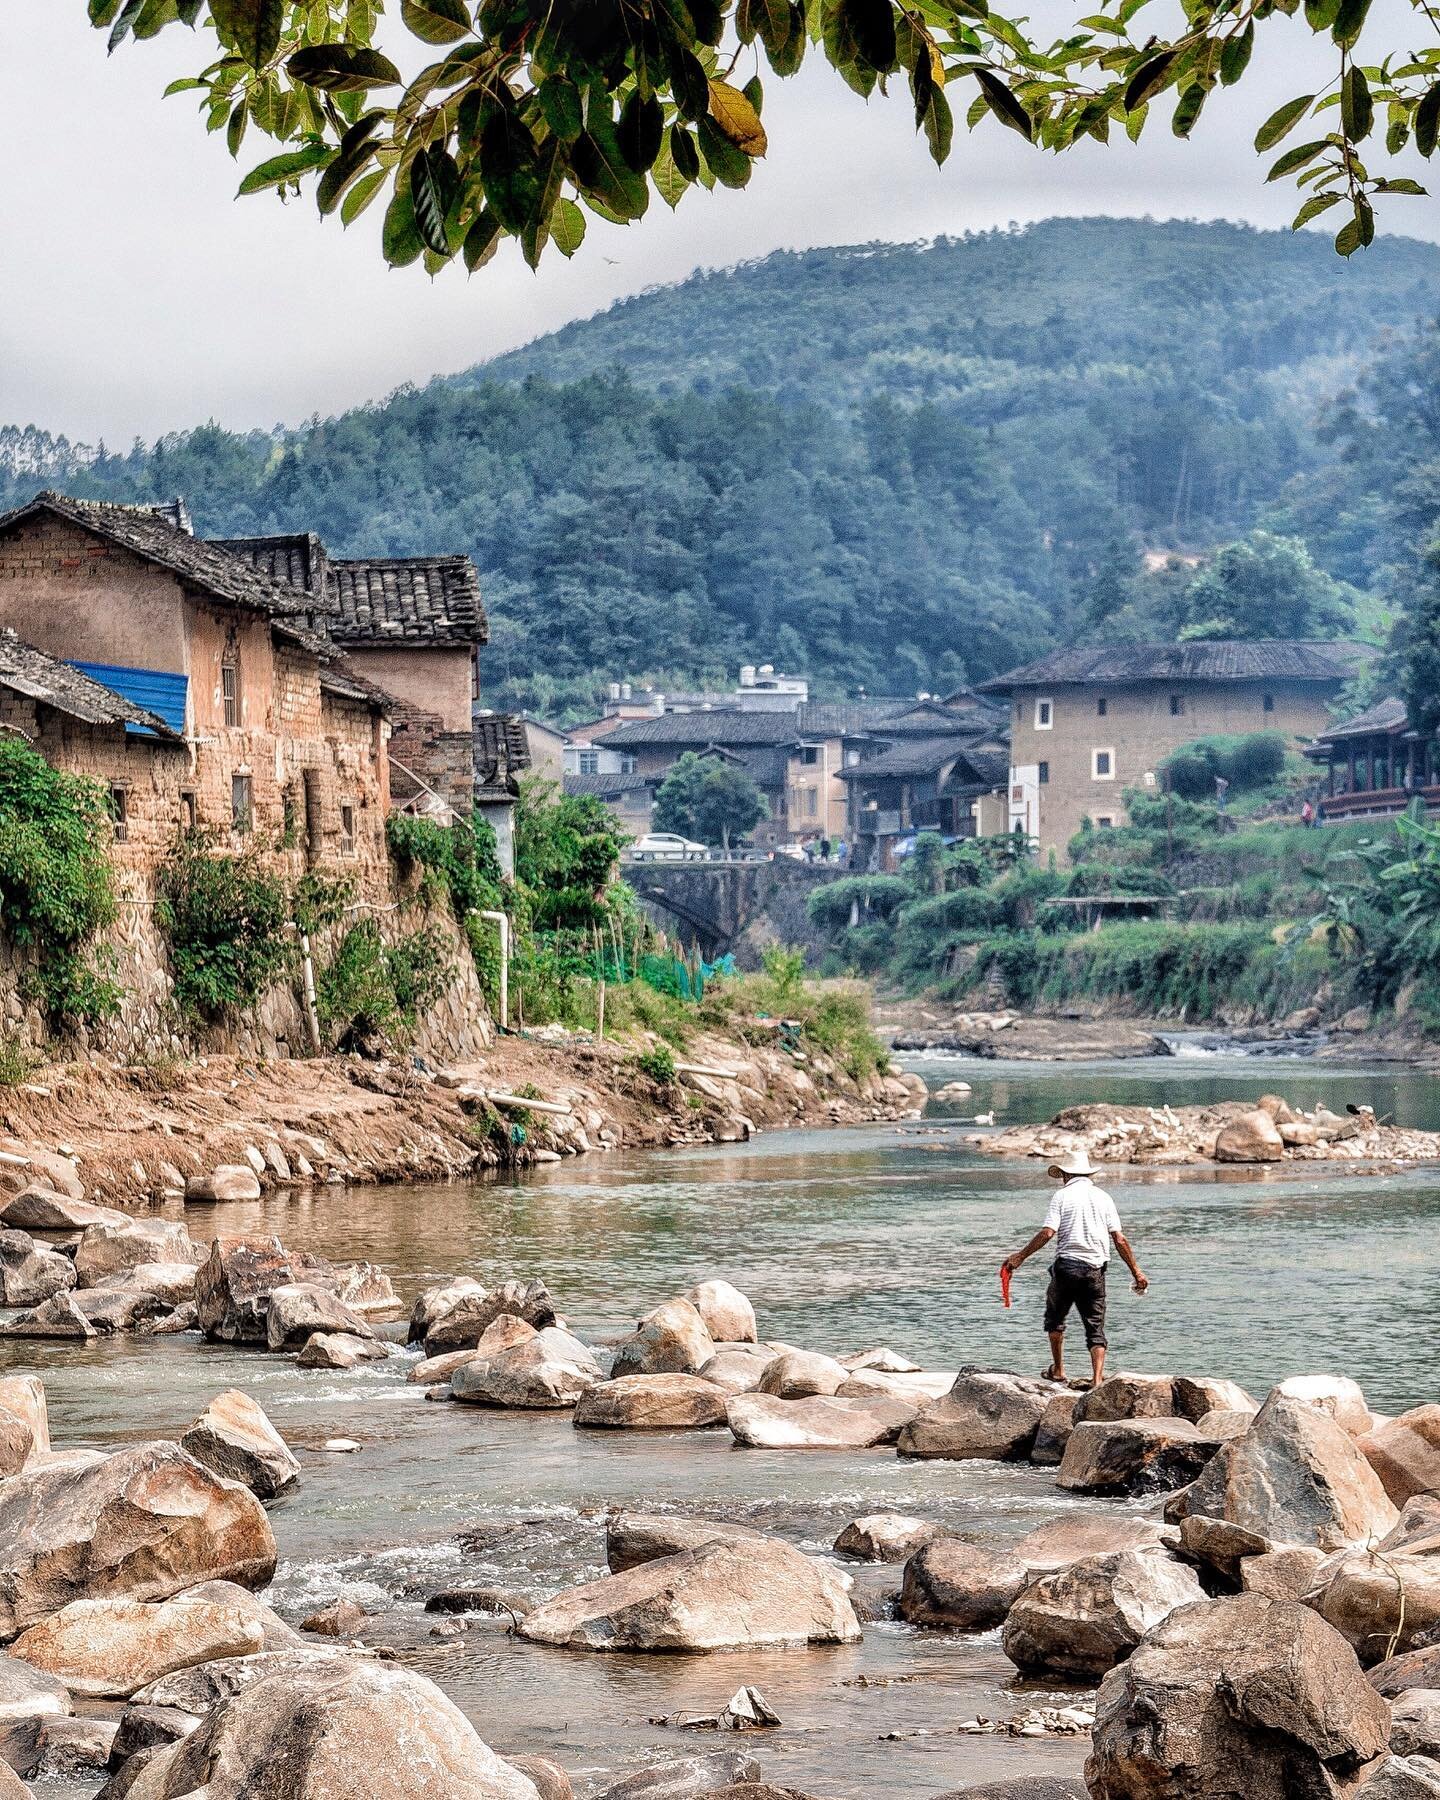 &ldquo;The simple things are also the most extraordinary things, and only the wise can see them.&rdquo; &mdash;  Paulo Coelho

A slice of life in the southern Fujian province of China.

#UncoveringCities #UncoveringChina #TLAsia #DestinationDeluxe #y